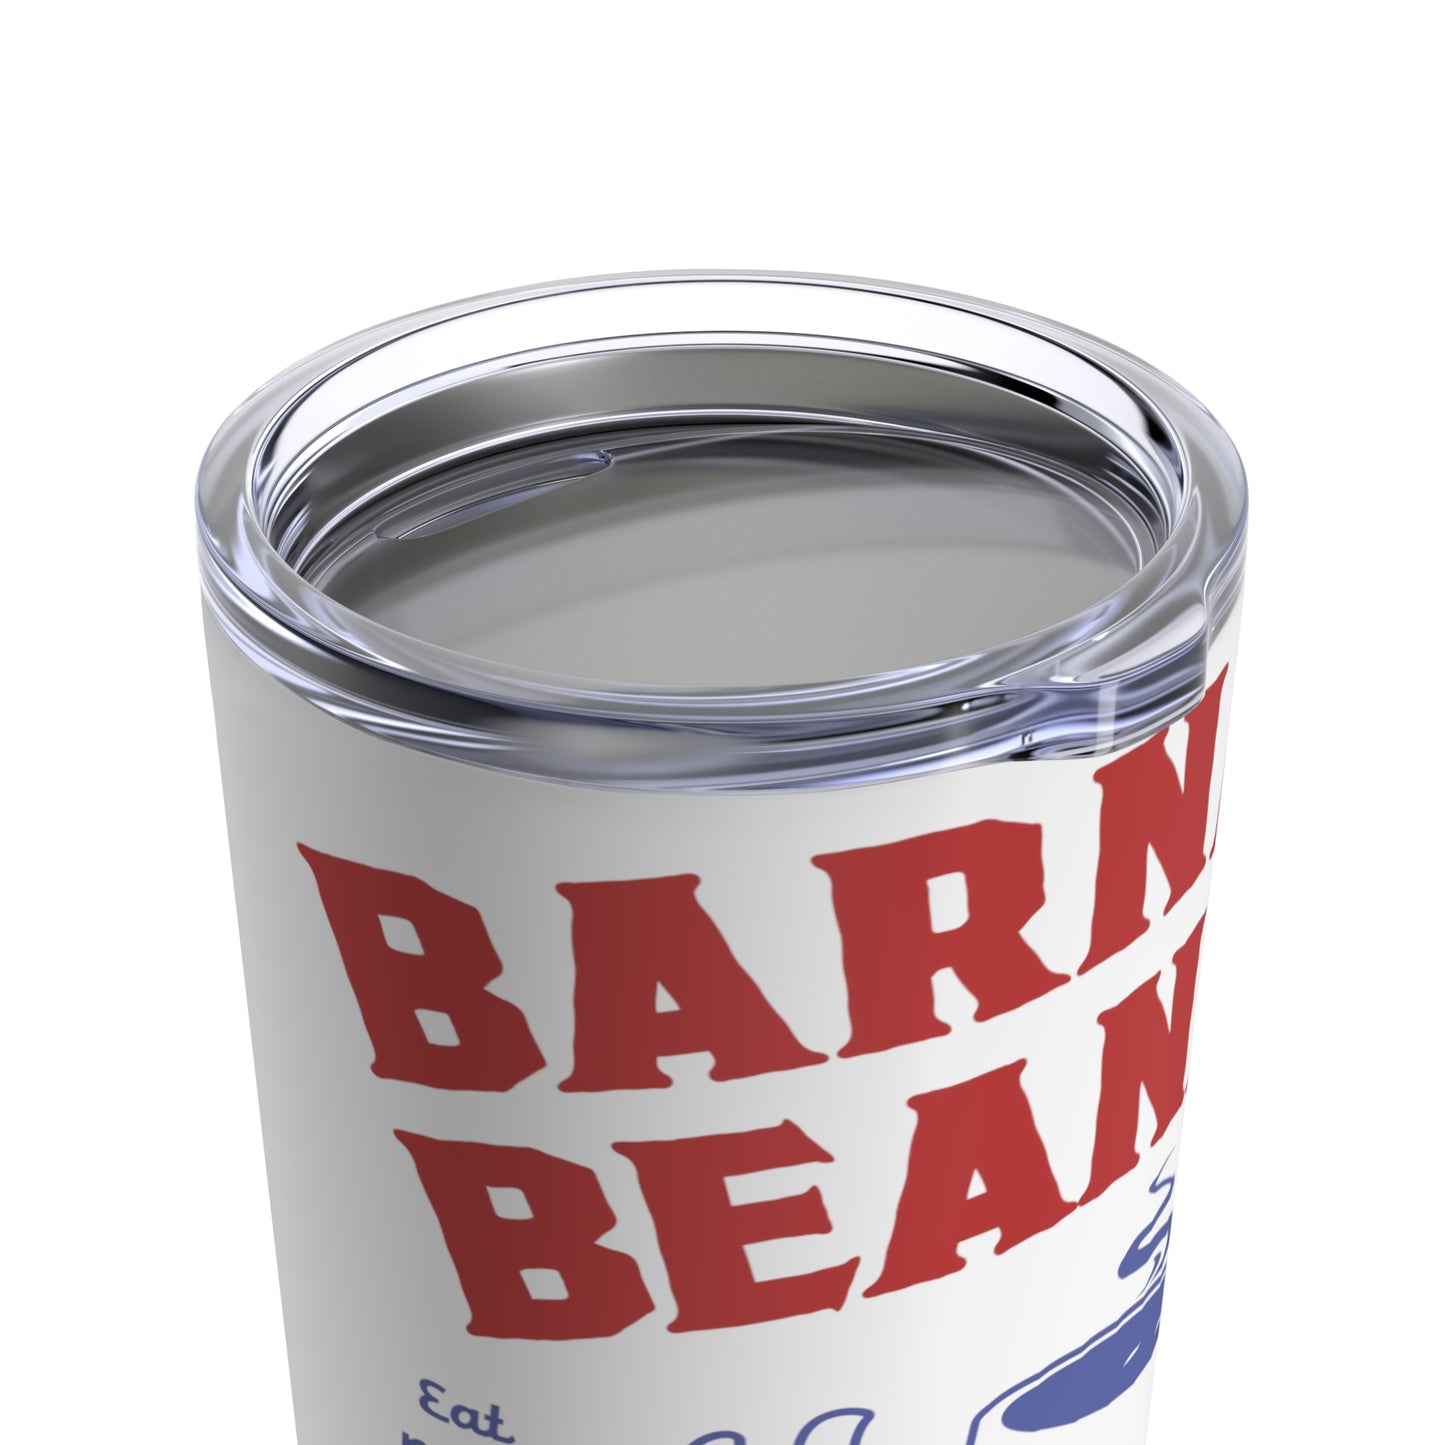 Eat More Chili. Drink More Beer. | BARNEY'S BEANERY - Red & Blue Tumbler 20oz